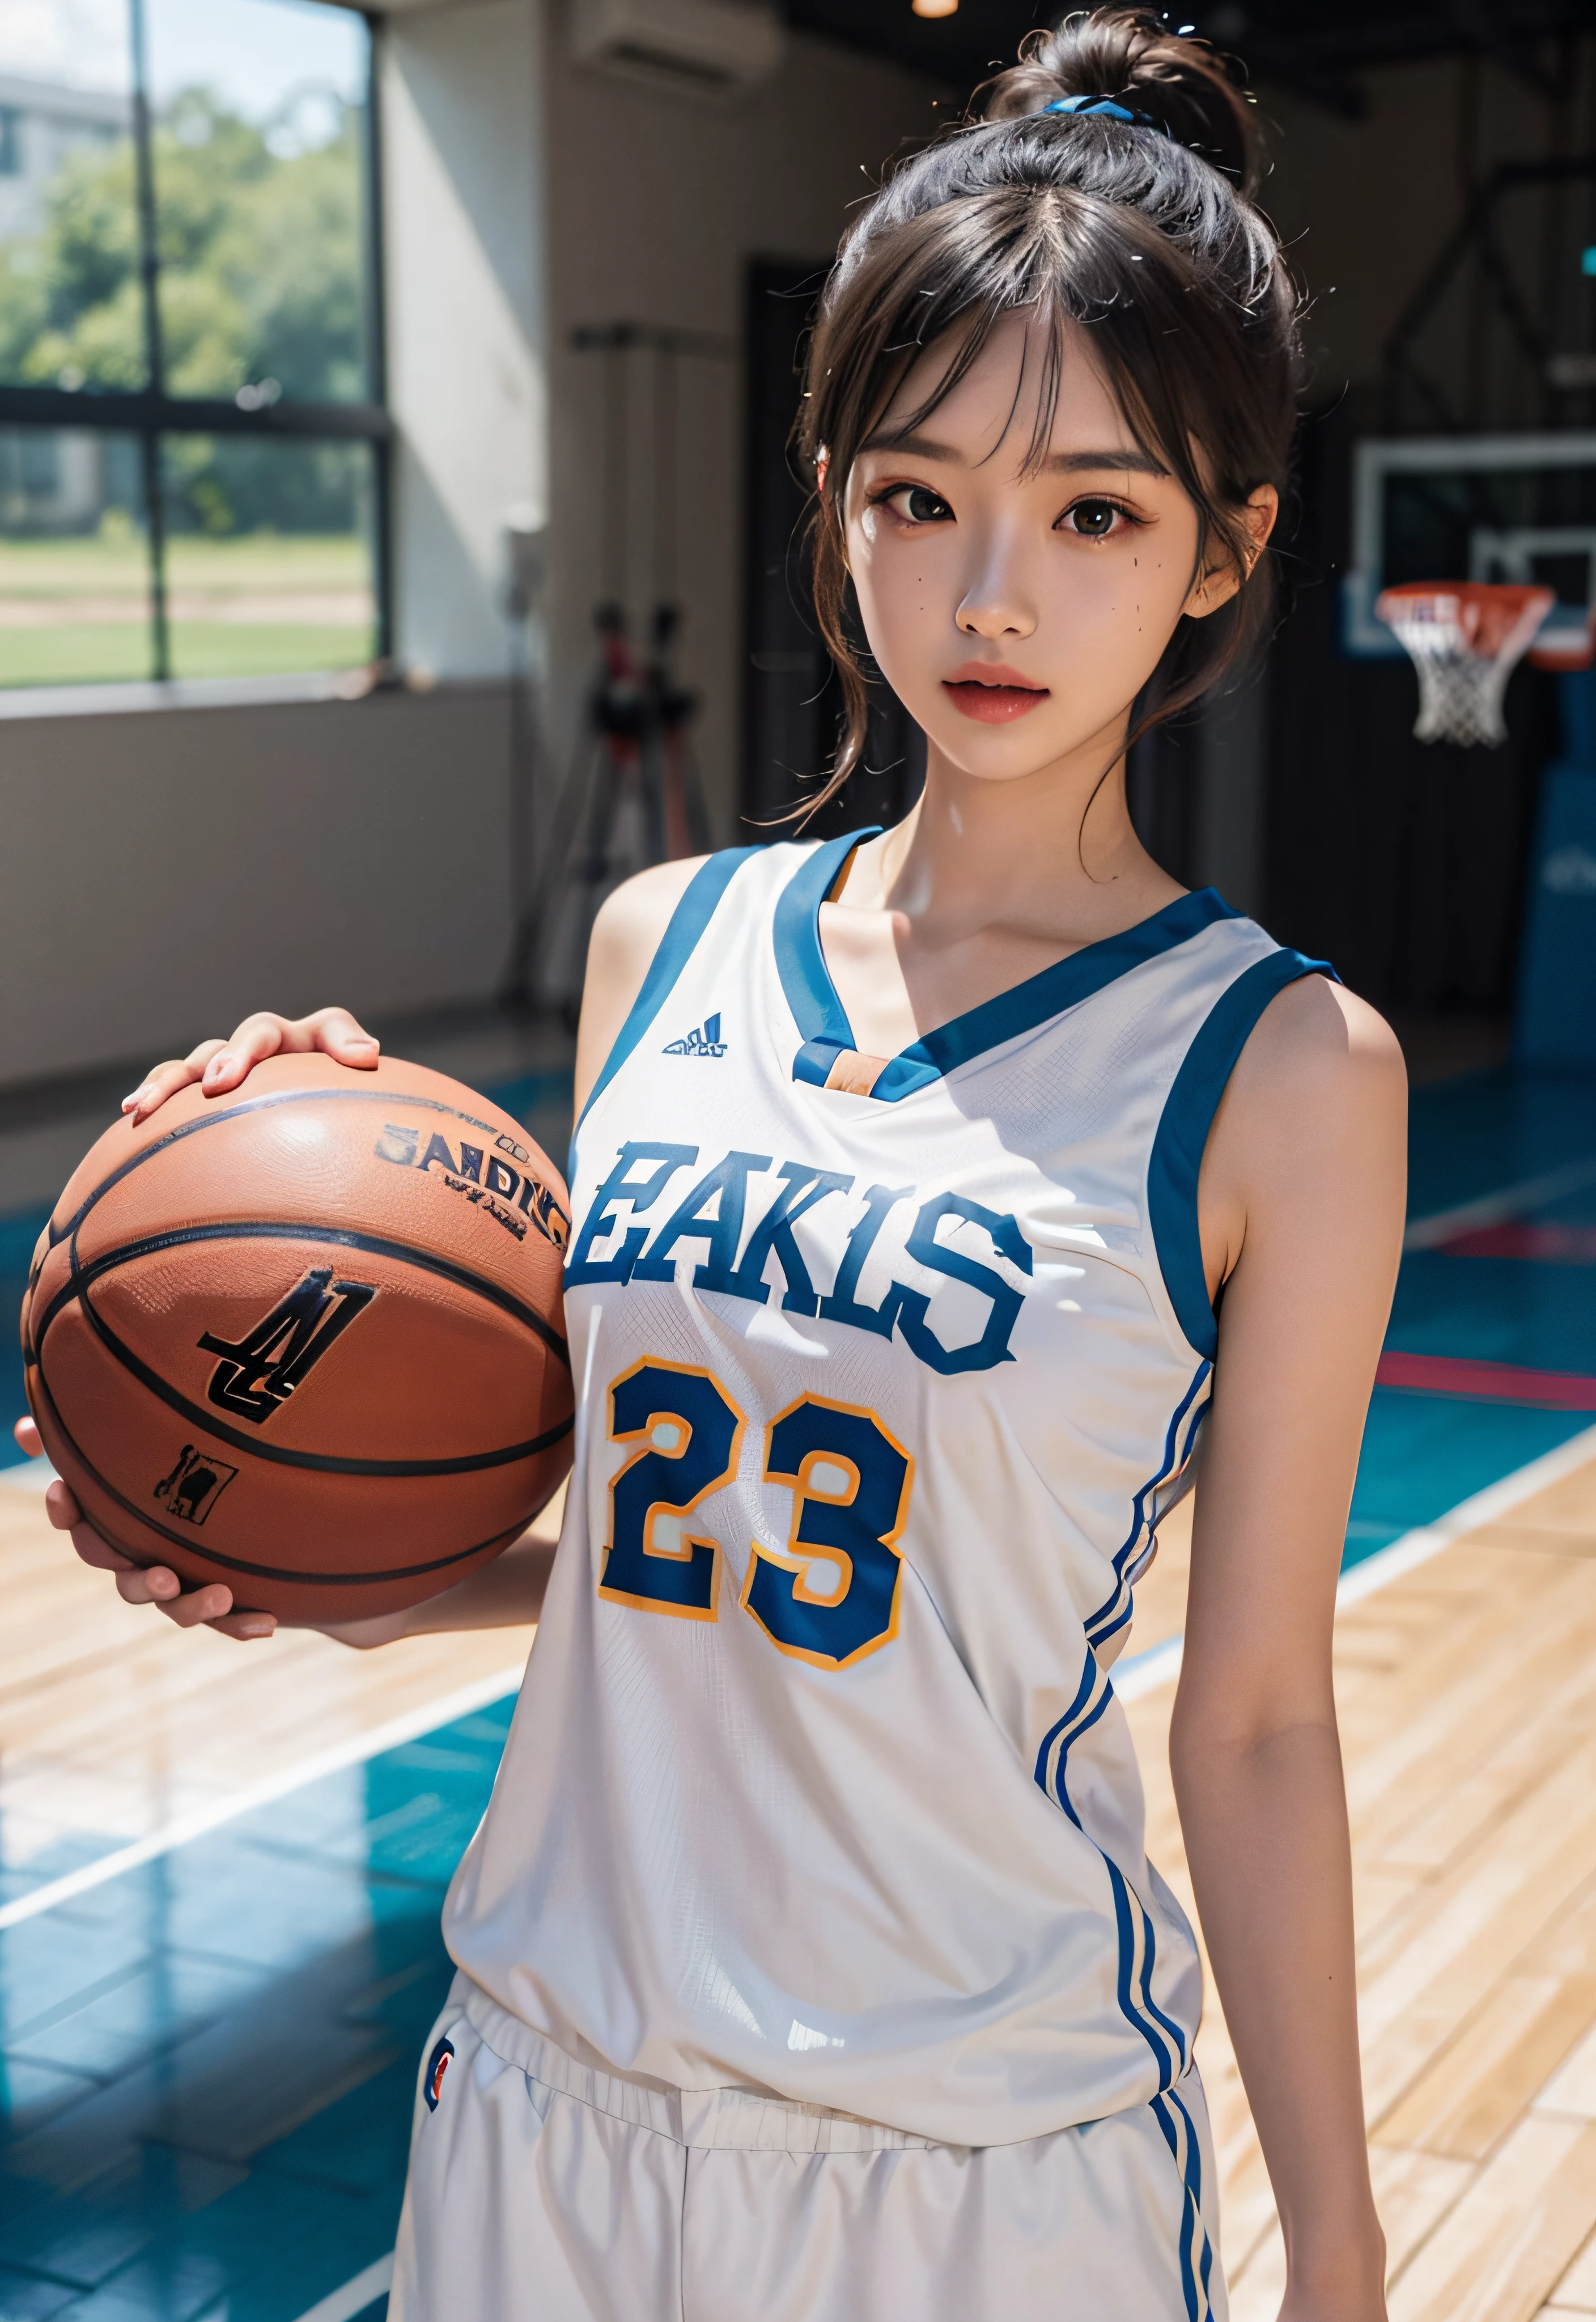 （ best qualtiy， tmasterpiece：1.2），A high resolution，8K,1girll，Delicate face，real looking skin，Dynamic light and shadow,Sharp focus,depth of fields,The eyes are delicate,pupil realistic, Playful expression， wear basketball uniform，（perfect bodies），（Big breasted 1.1），basketball playground，realisticlying, ultra - detailed, (shiny skins, perspired:1.4), looking at viewert,